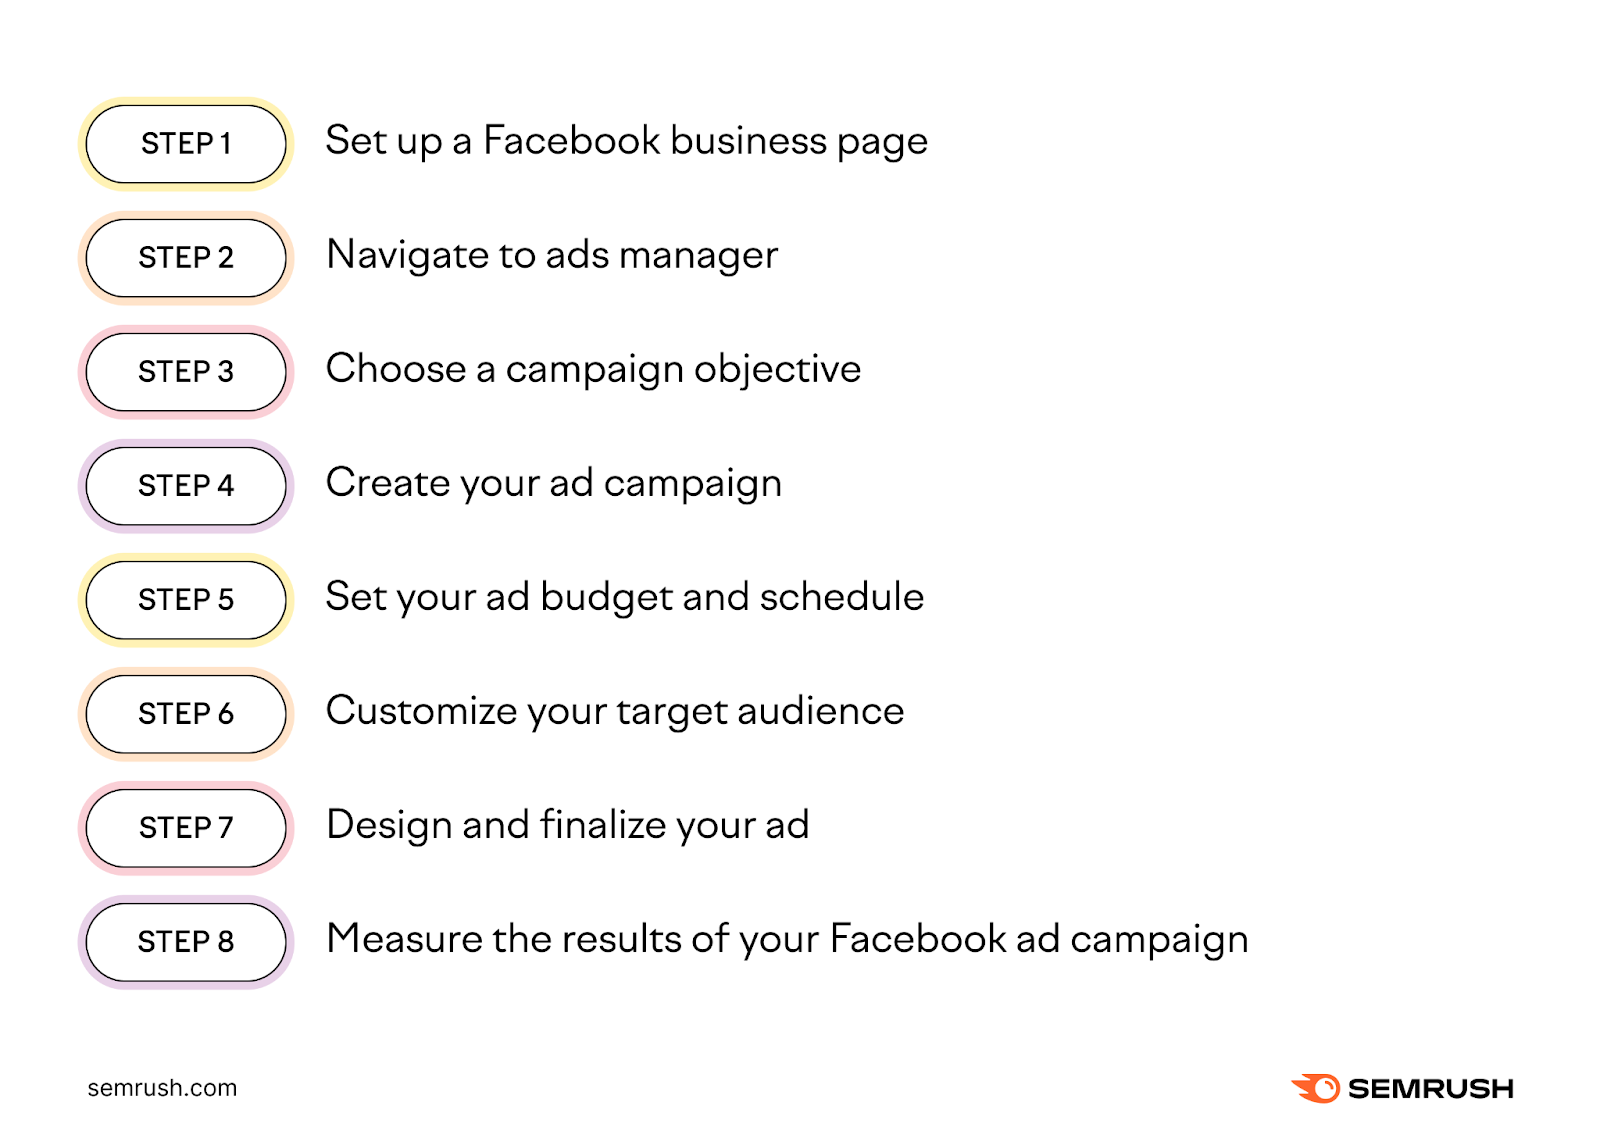 An infographic listing the eight steps of advertising on Facebook